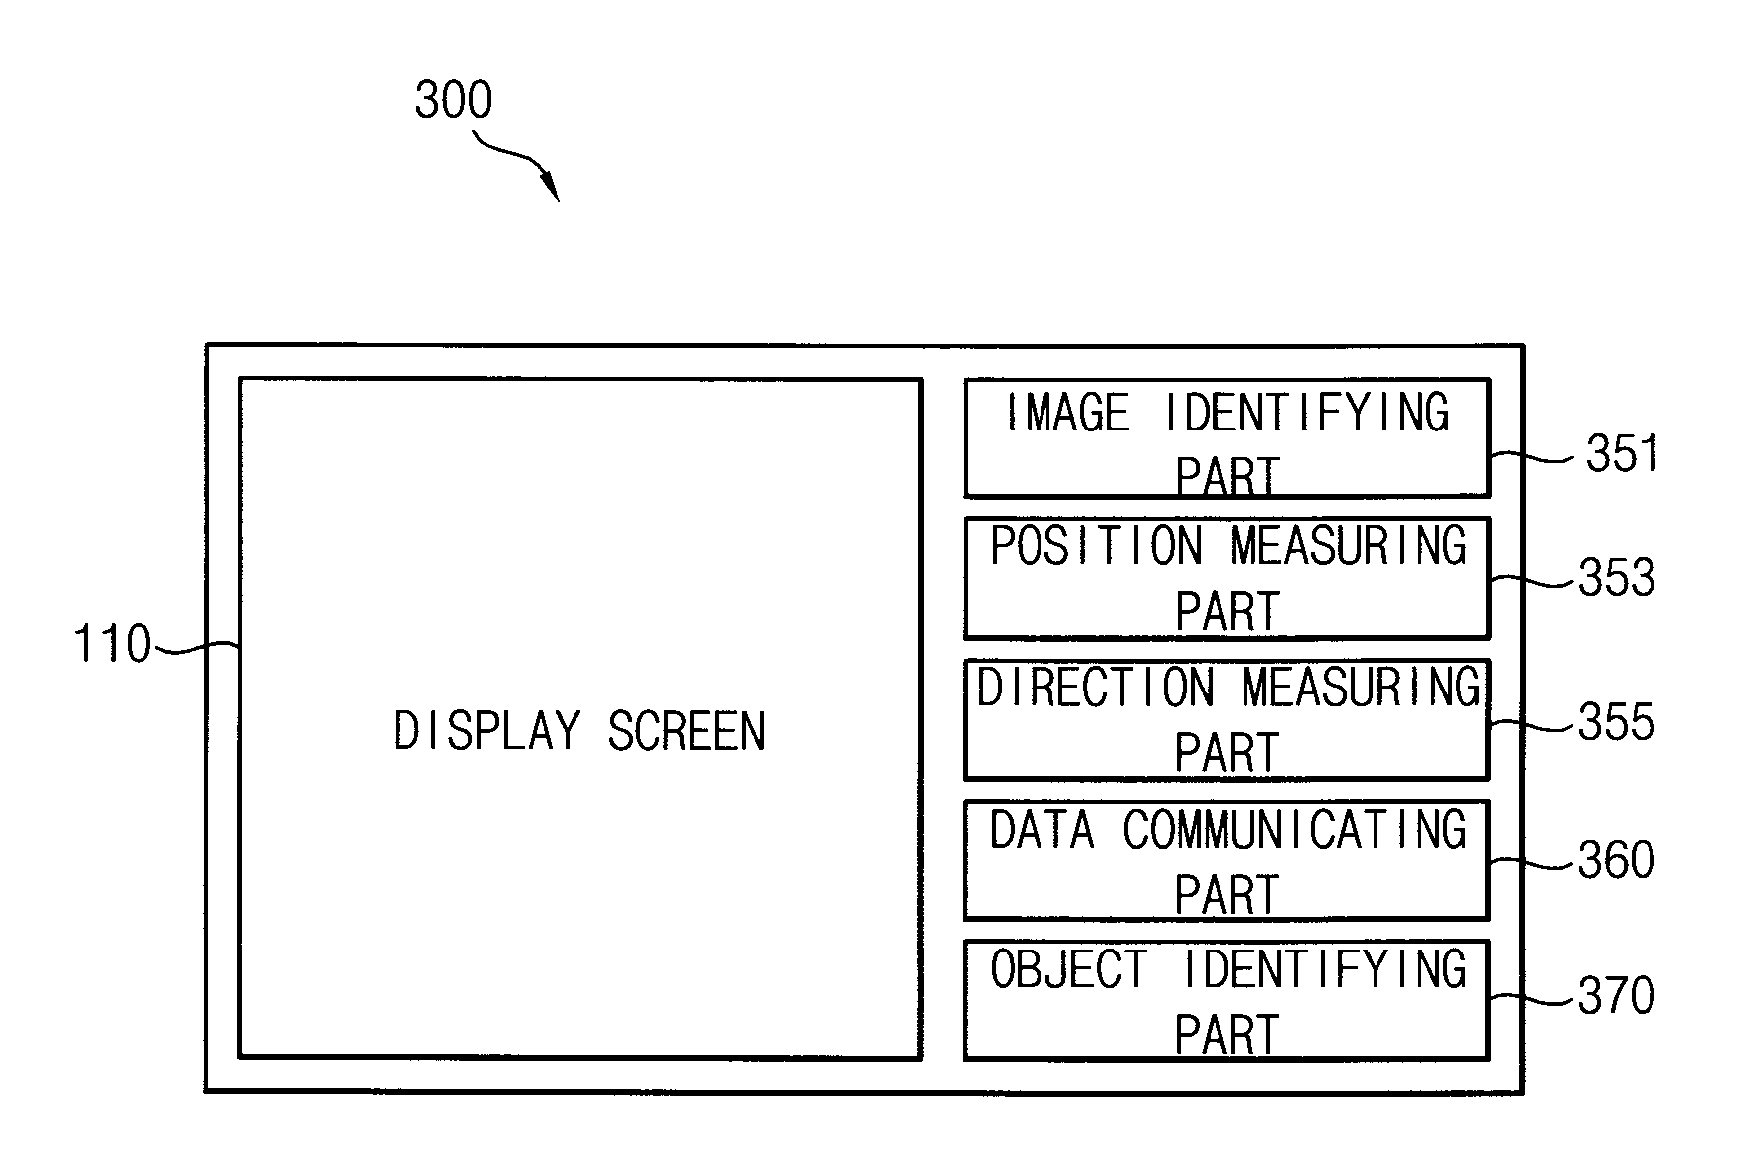 Object identification system and method of identifying an object using the same